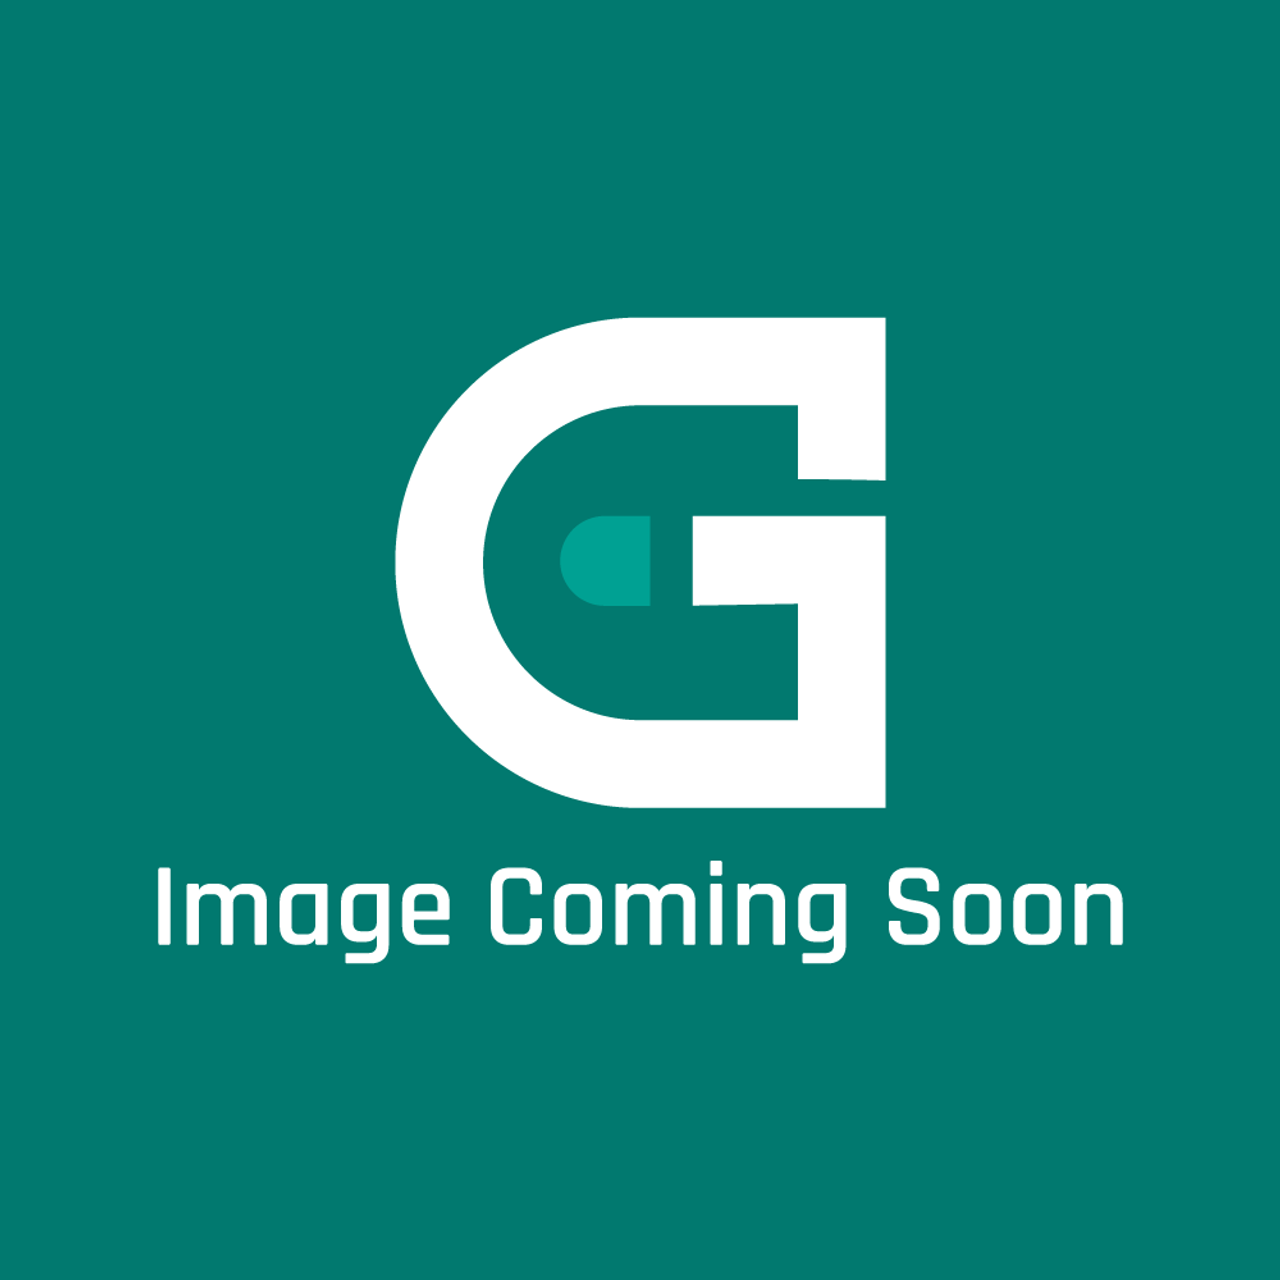 Star Mfg G3-Z5955 - Rear Panel 636Md - Image Coming Soon!